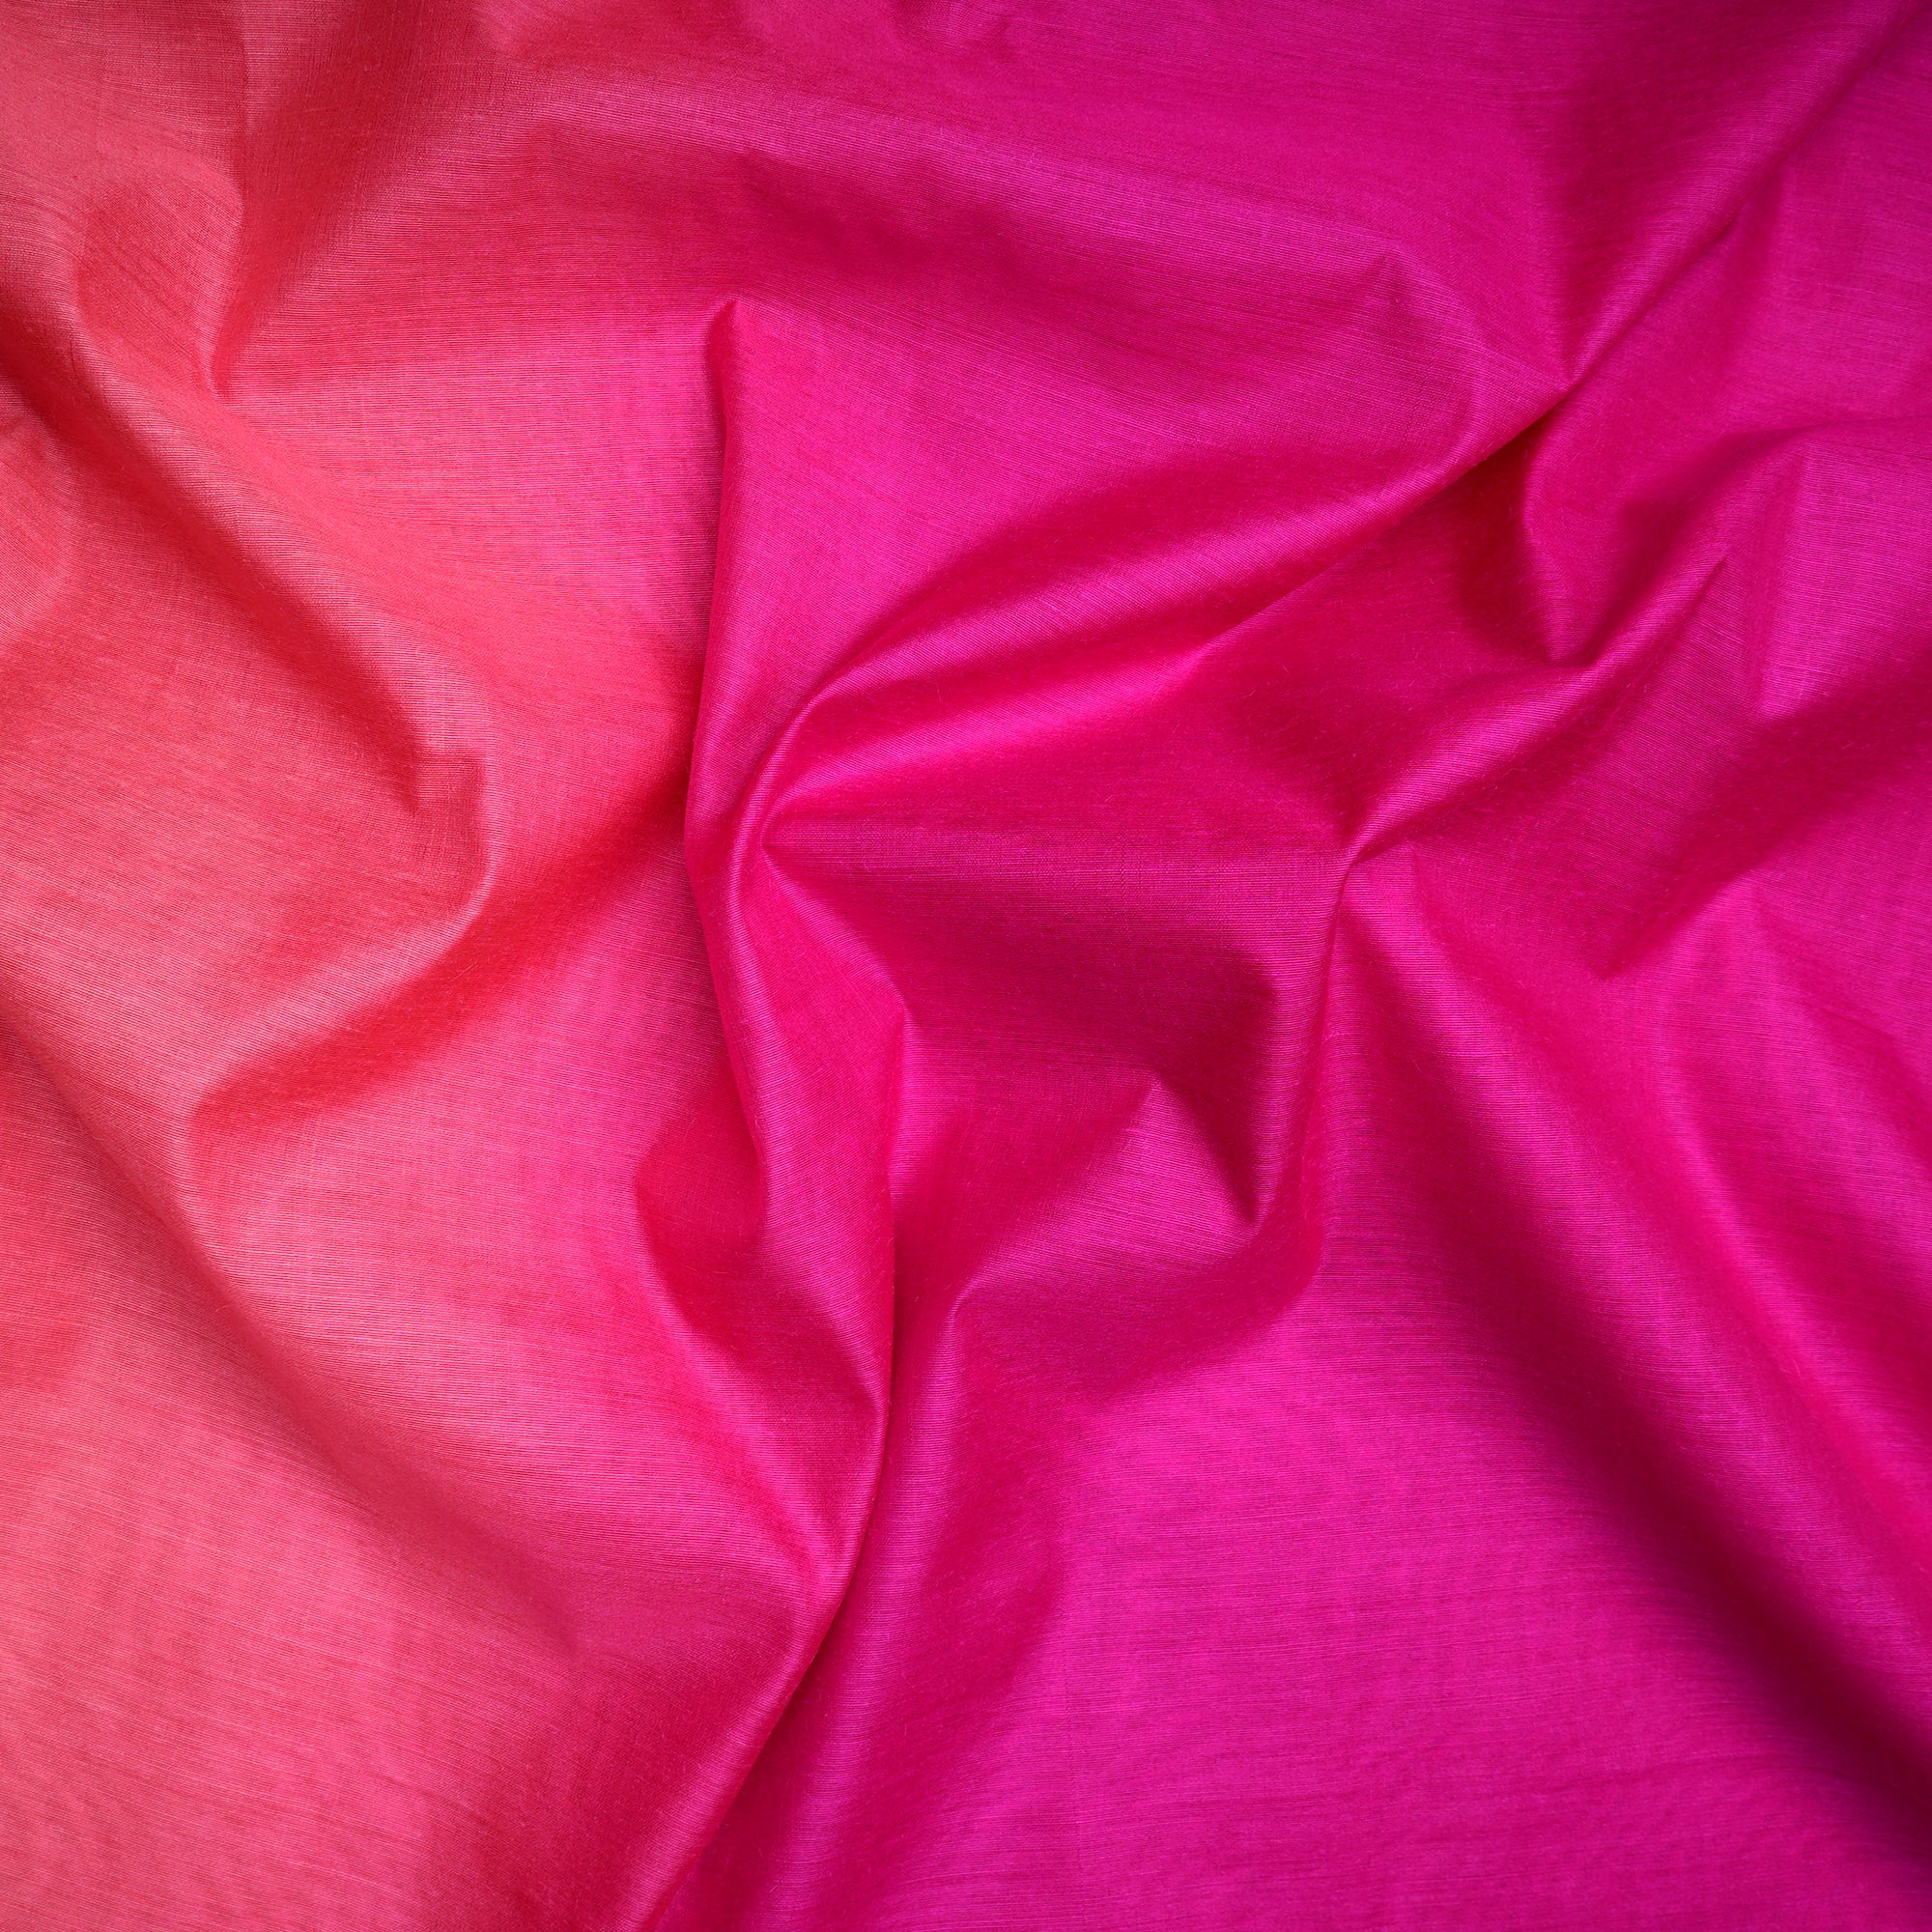 Pink Ombre Dyed Tussar Muga Fabric